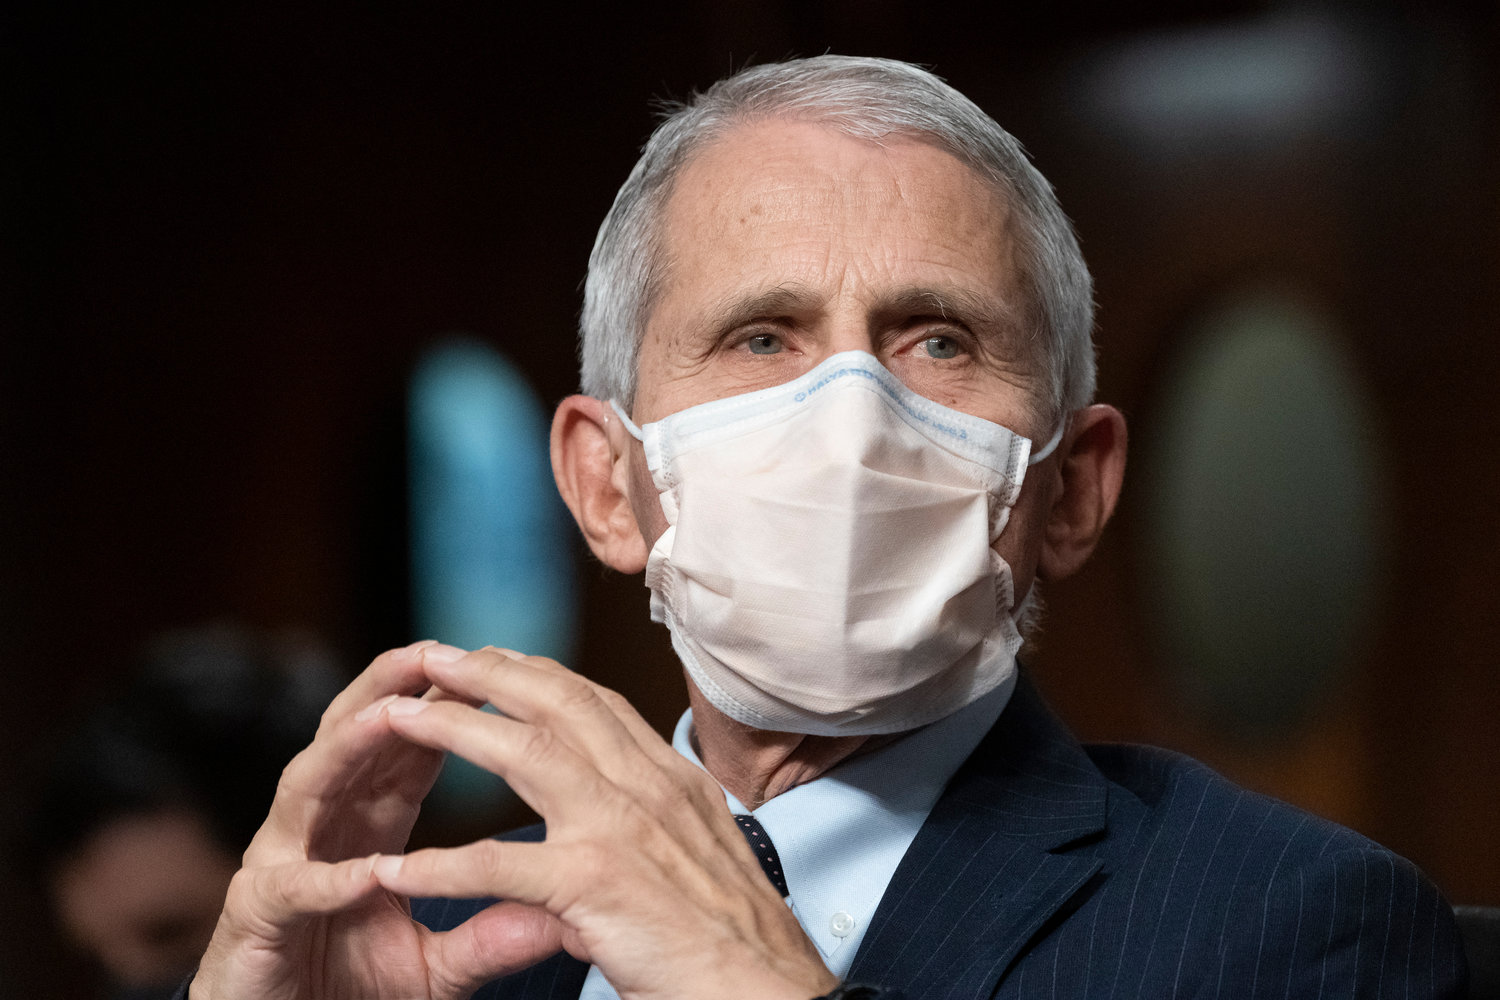 FILE - Dr. Anthony Fauci, director of the National Institute of Allergy and Infectious Diseases, listens during opening statements during a Senate Health, Education, Labor, and Pensions Committee hearing on Capitol Hill, Nov. 4, 2021, in Washington. Fauci, the nation's top infectious disease expert who became a household name, and the subject of partisan attacks, during the COVID-19 pandemic, announced Monday he will depart the federal government in December after more than 5 decades of service.  (AP Photo/Alex Brandon, File)